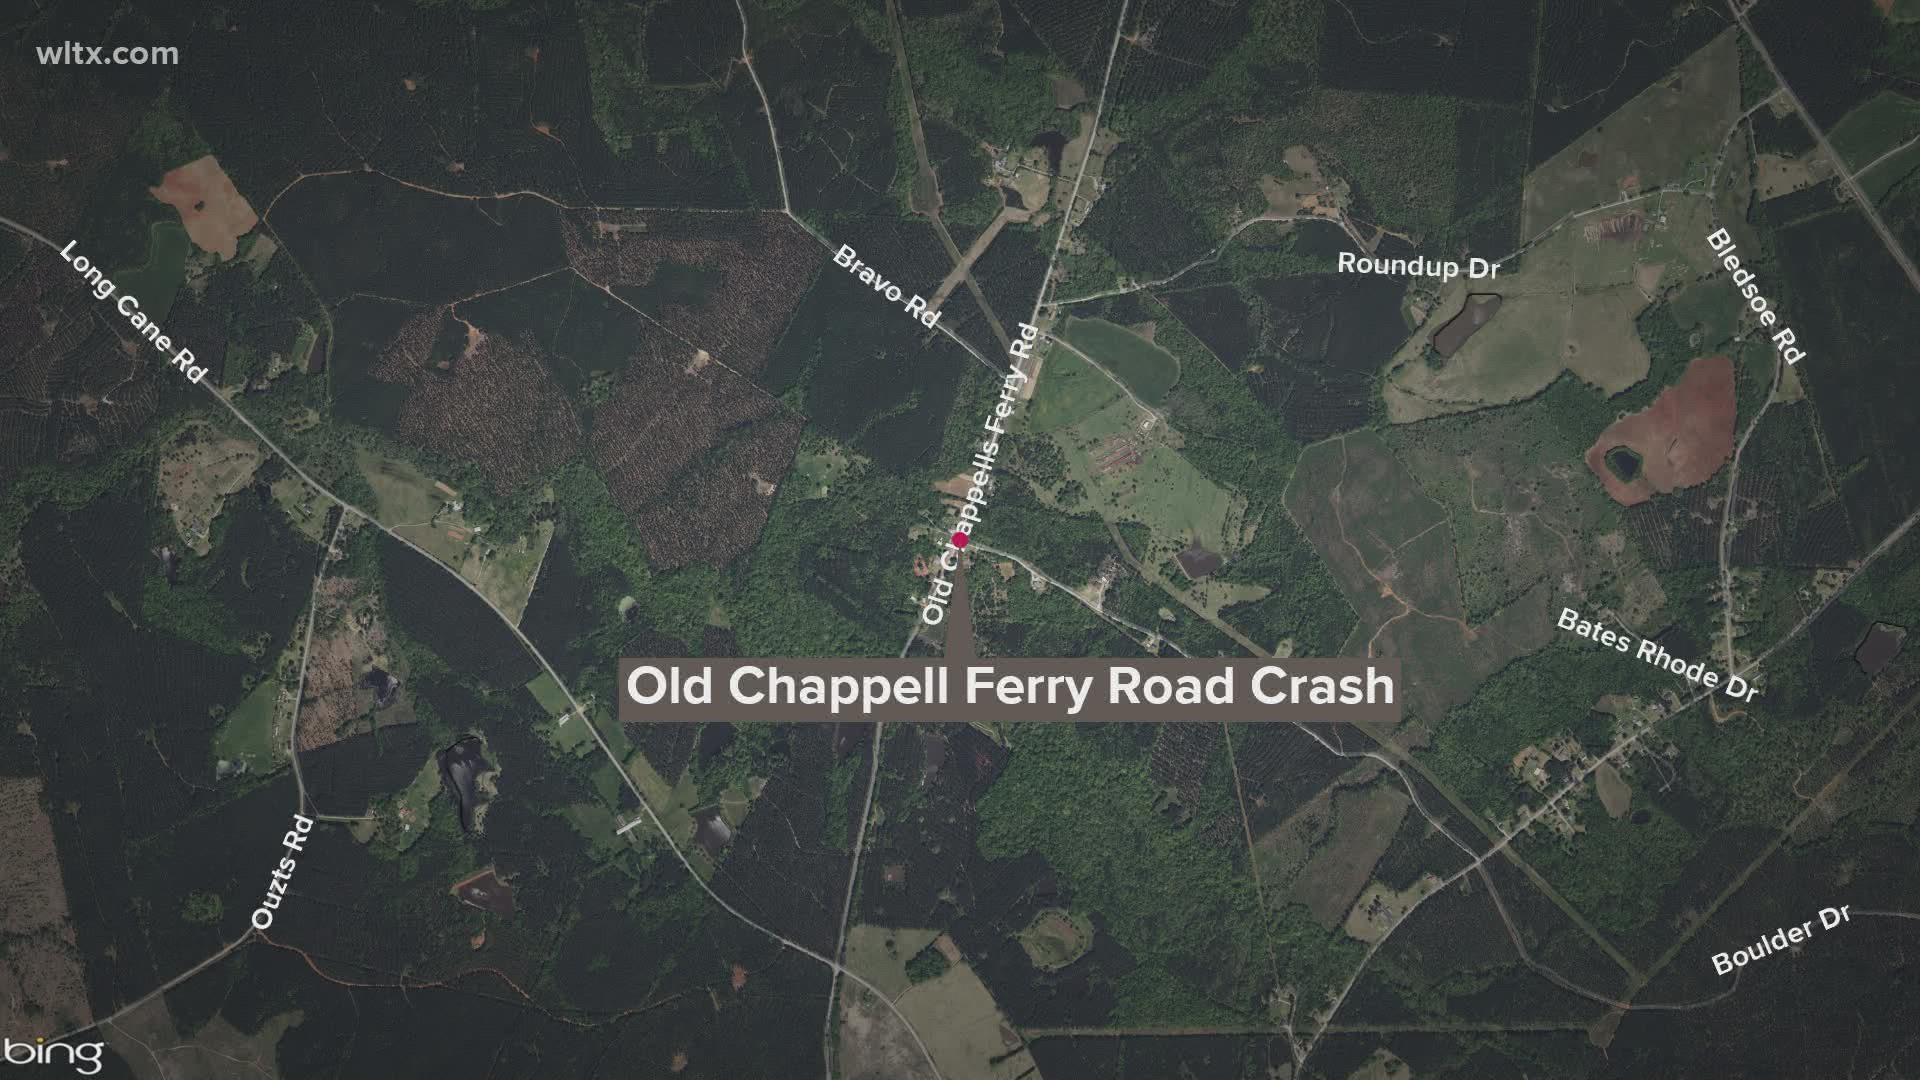 The crash happened just before 5 a.m. on Old Chappell Ferry Road near Boulder Drive - roughly five miles northwest of Johnston.